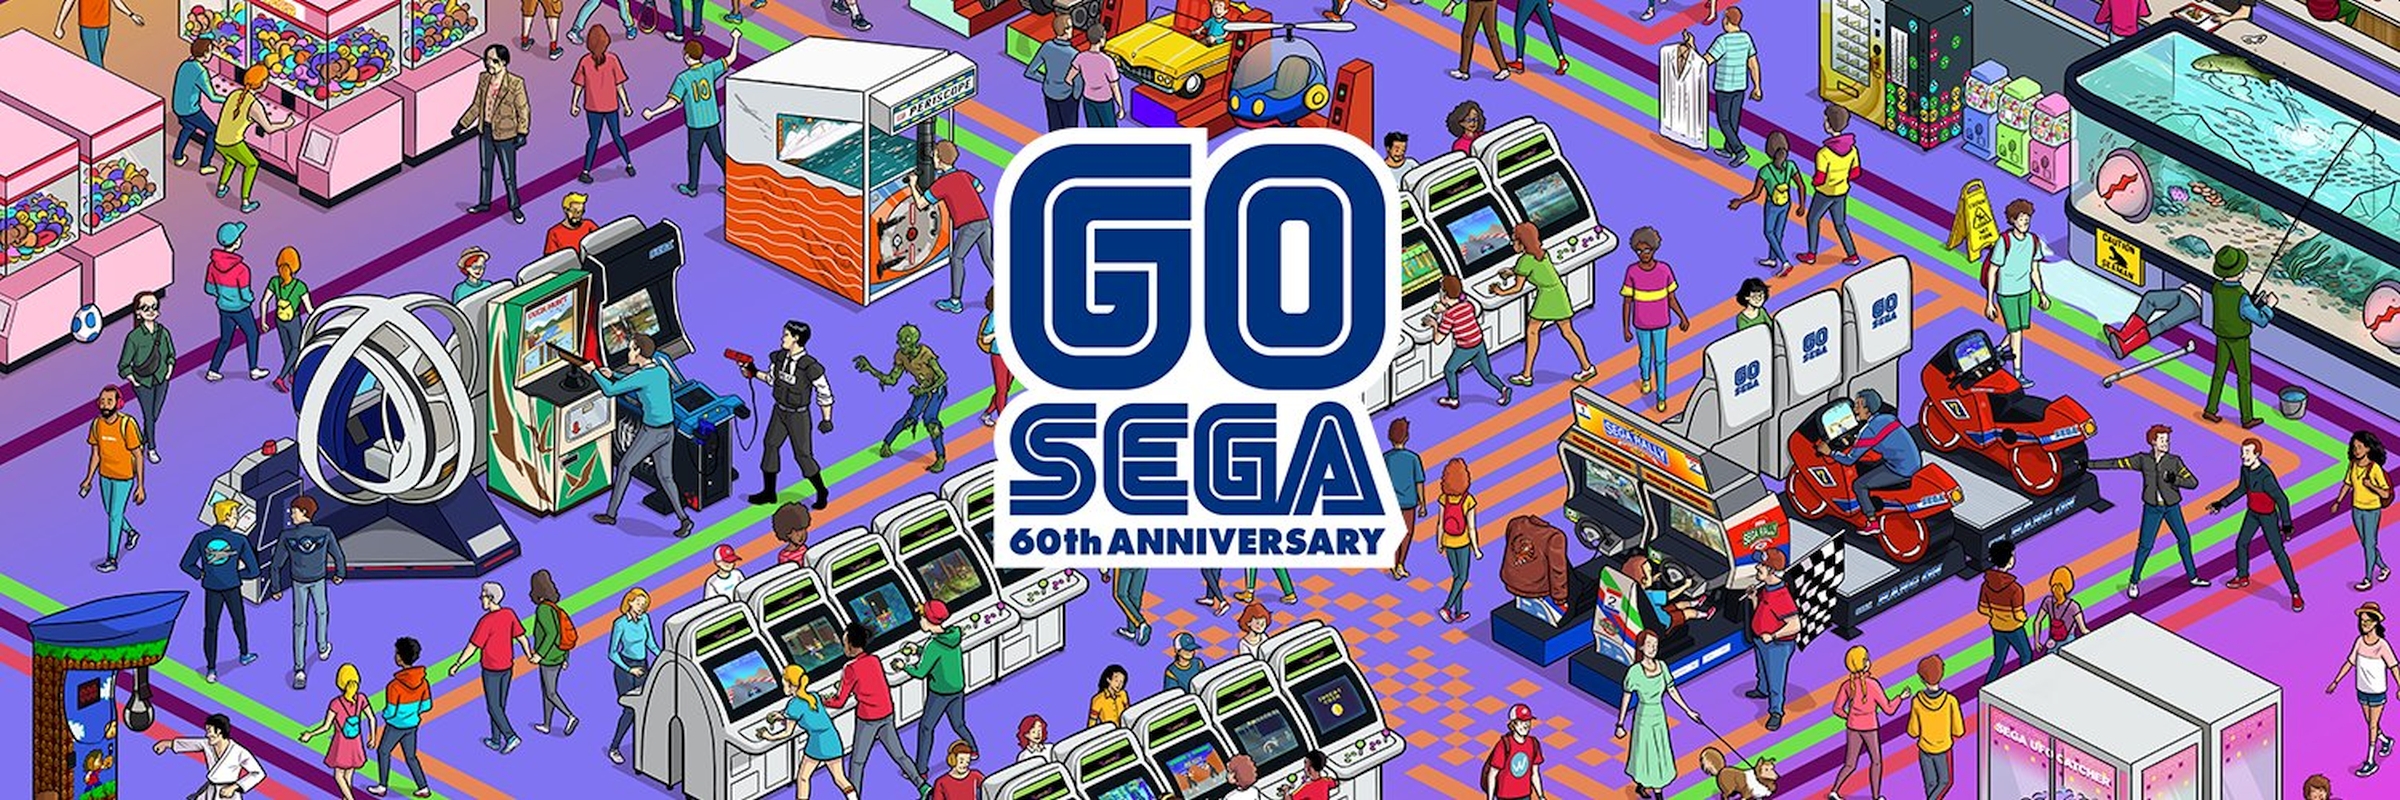 Sega Sells Arcade Business In Japan Due To Financial Losses Caused By Covid-19